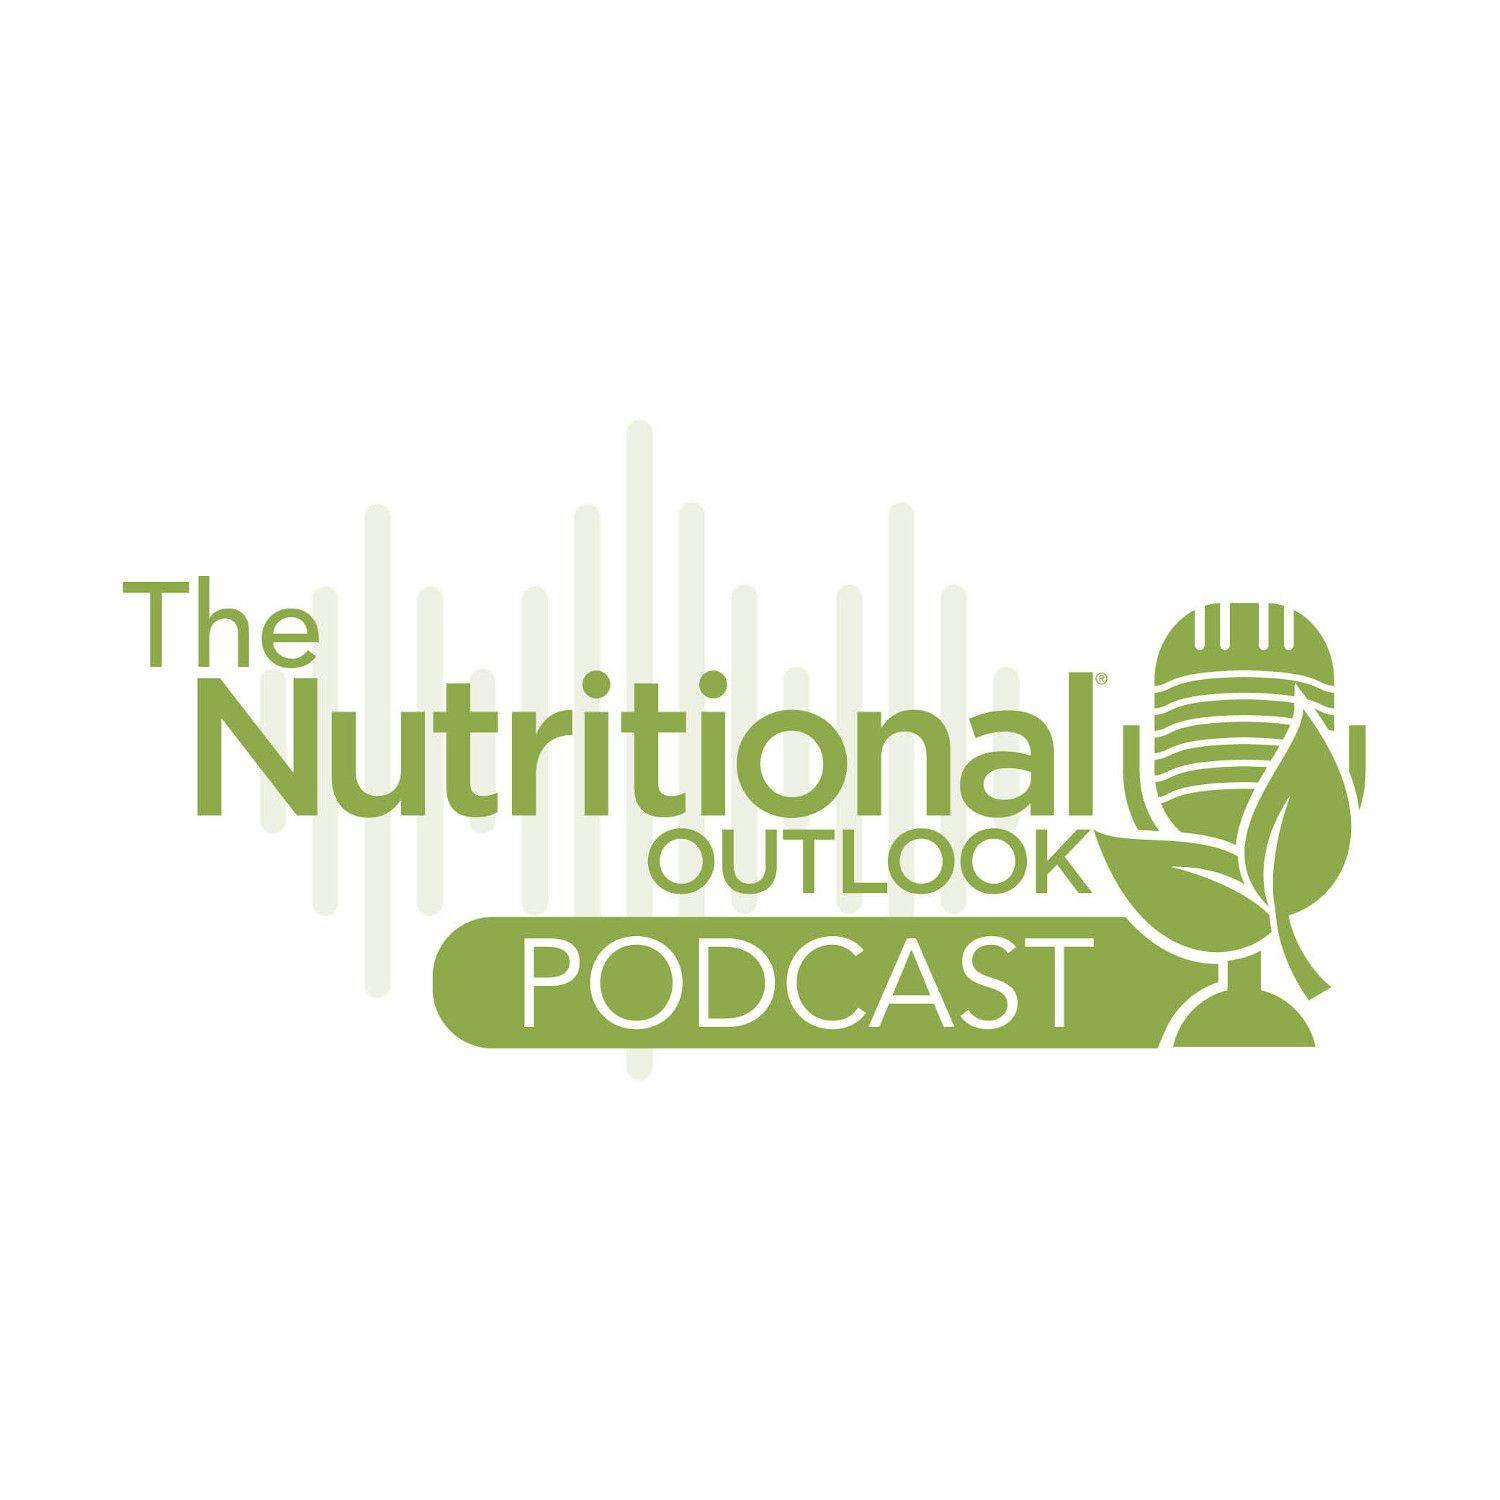 The Nutritional Outlook Podcast Episode 5: When will COVID-related logistical challenges improve for the dietary supplements industry?